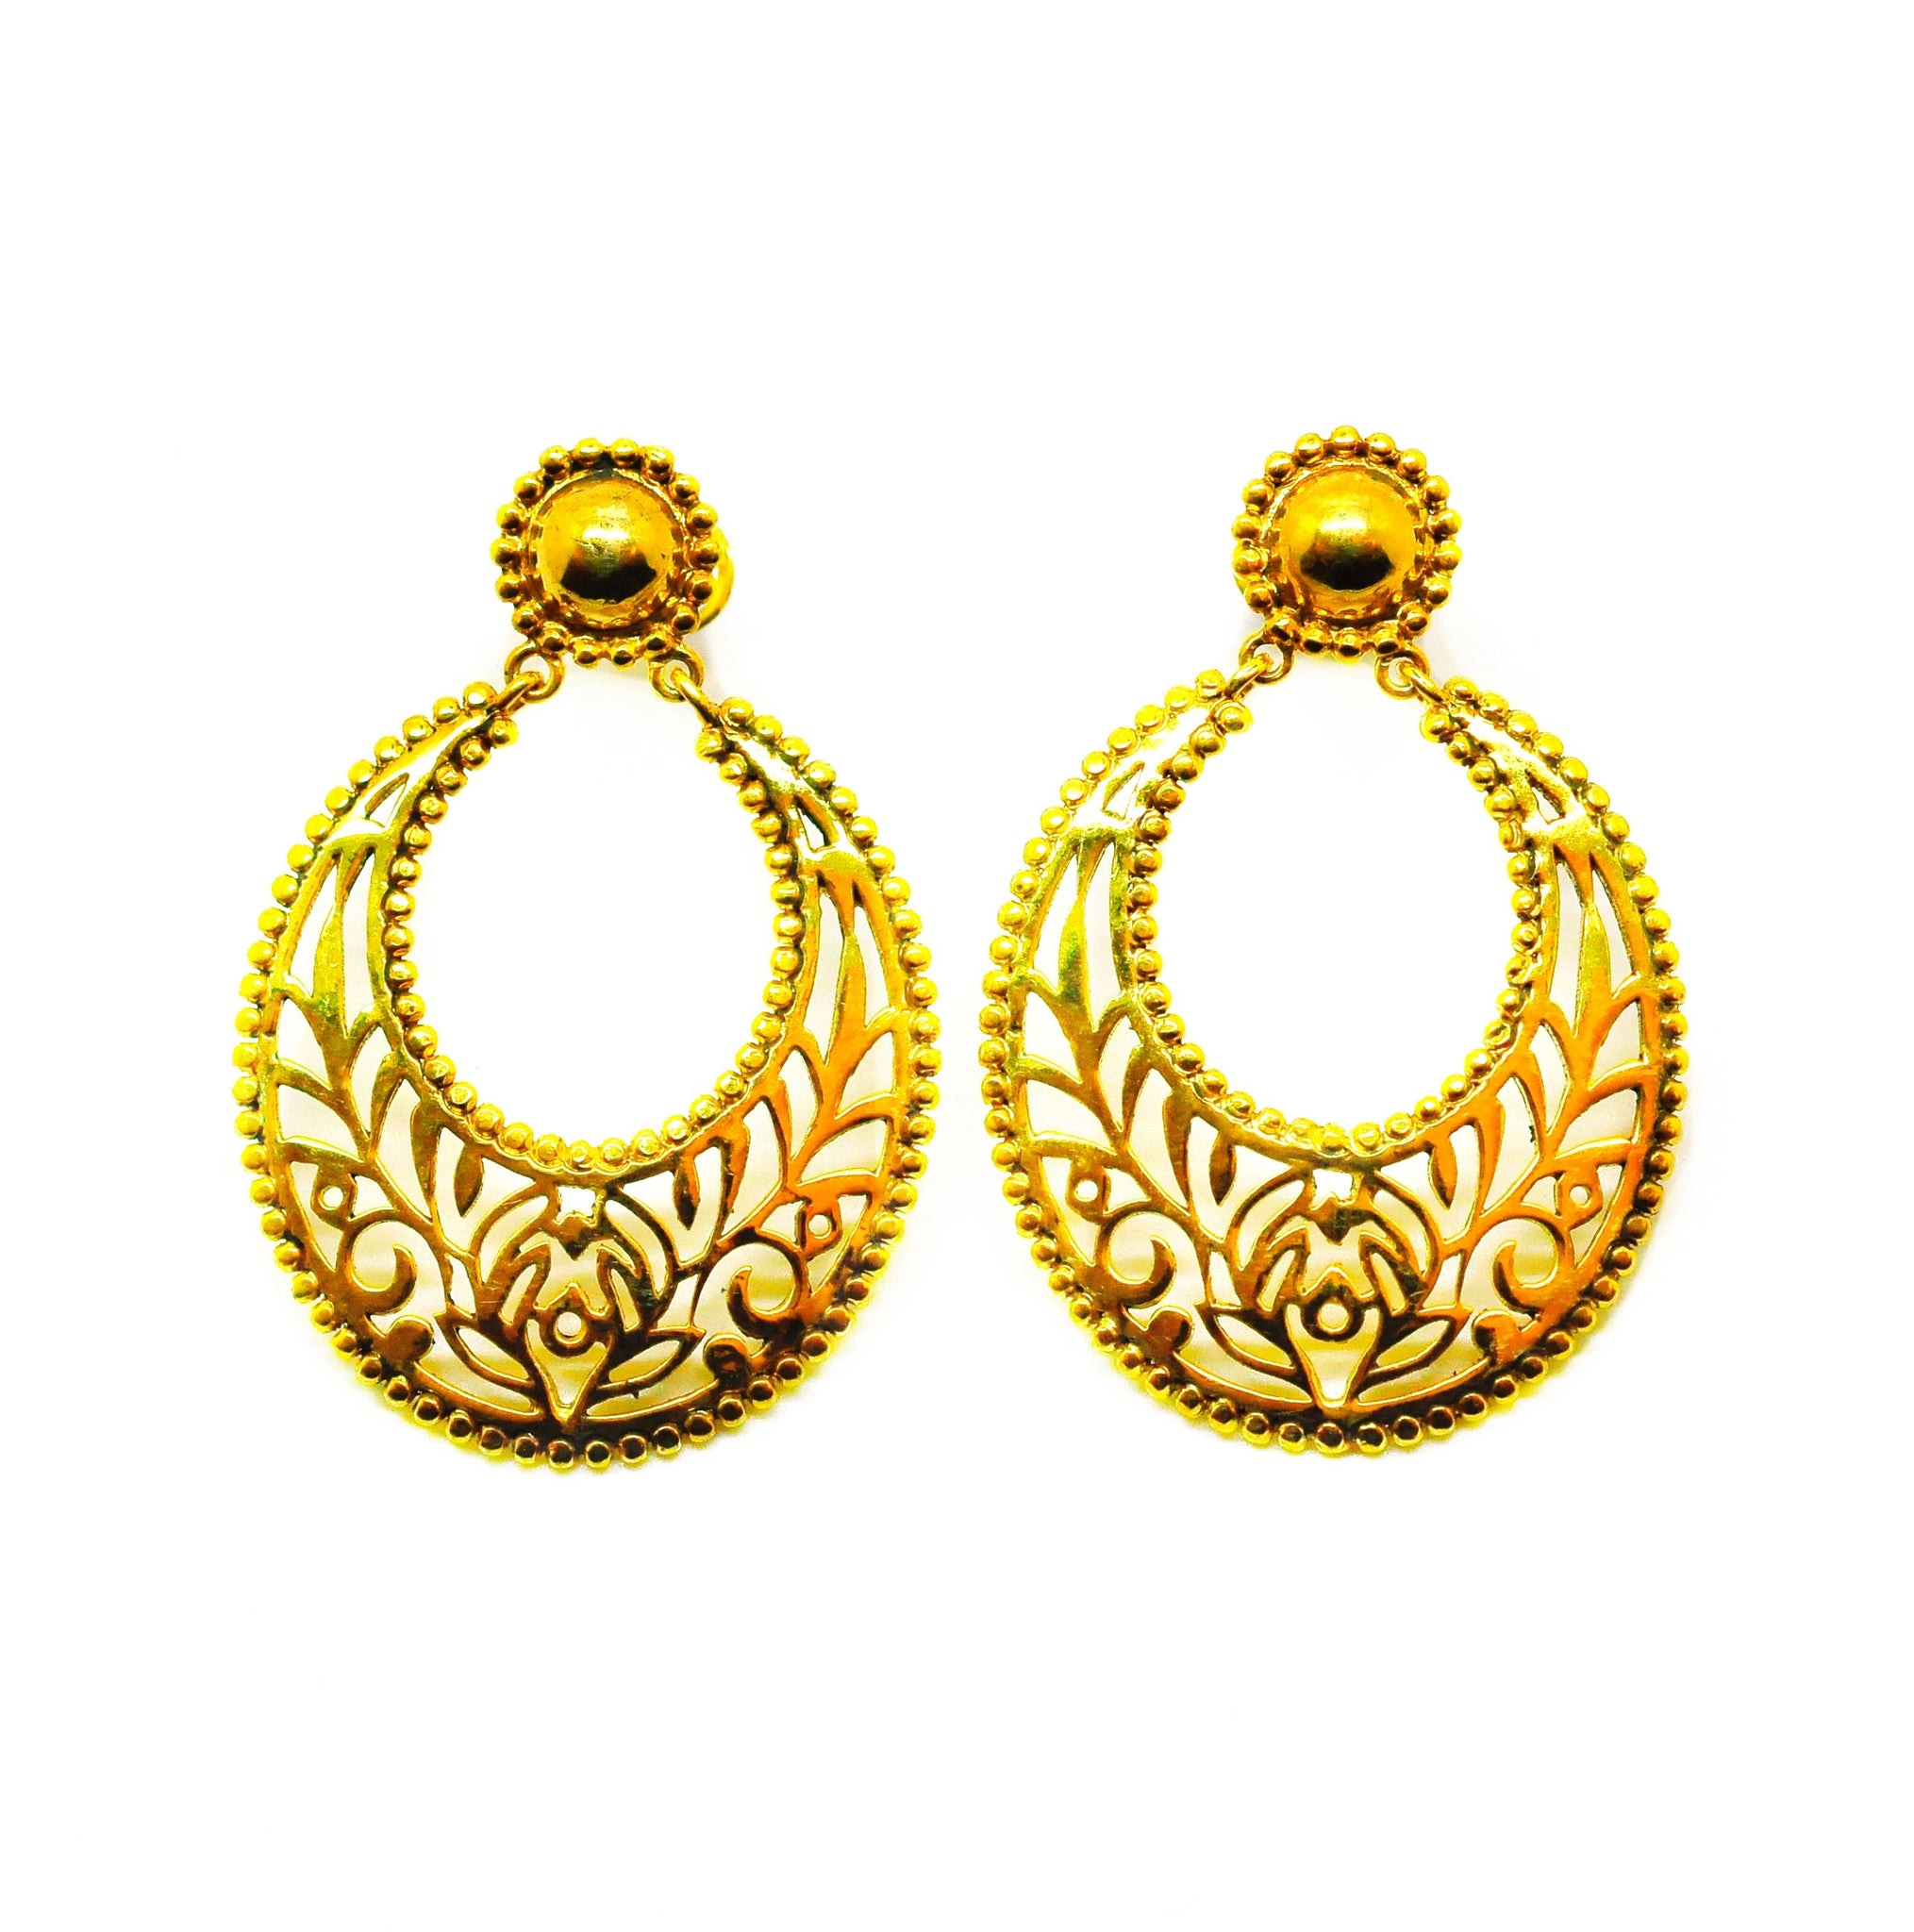 SOLD -NEW Indian filigree 6 - Gold